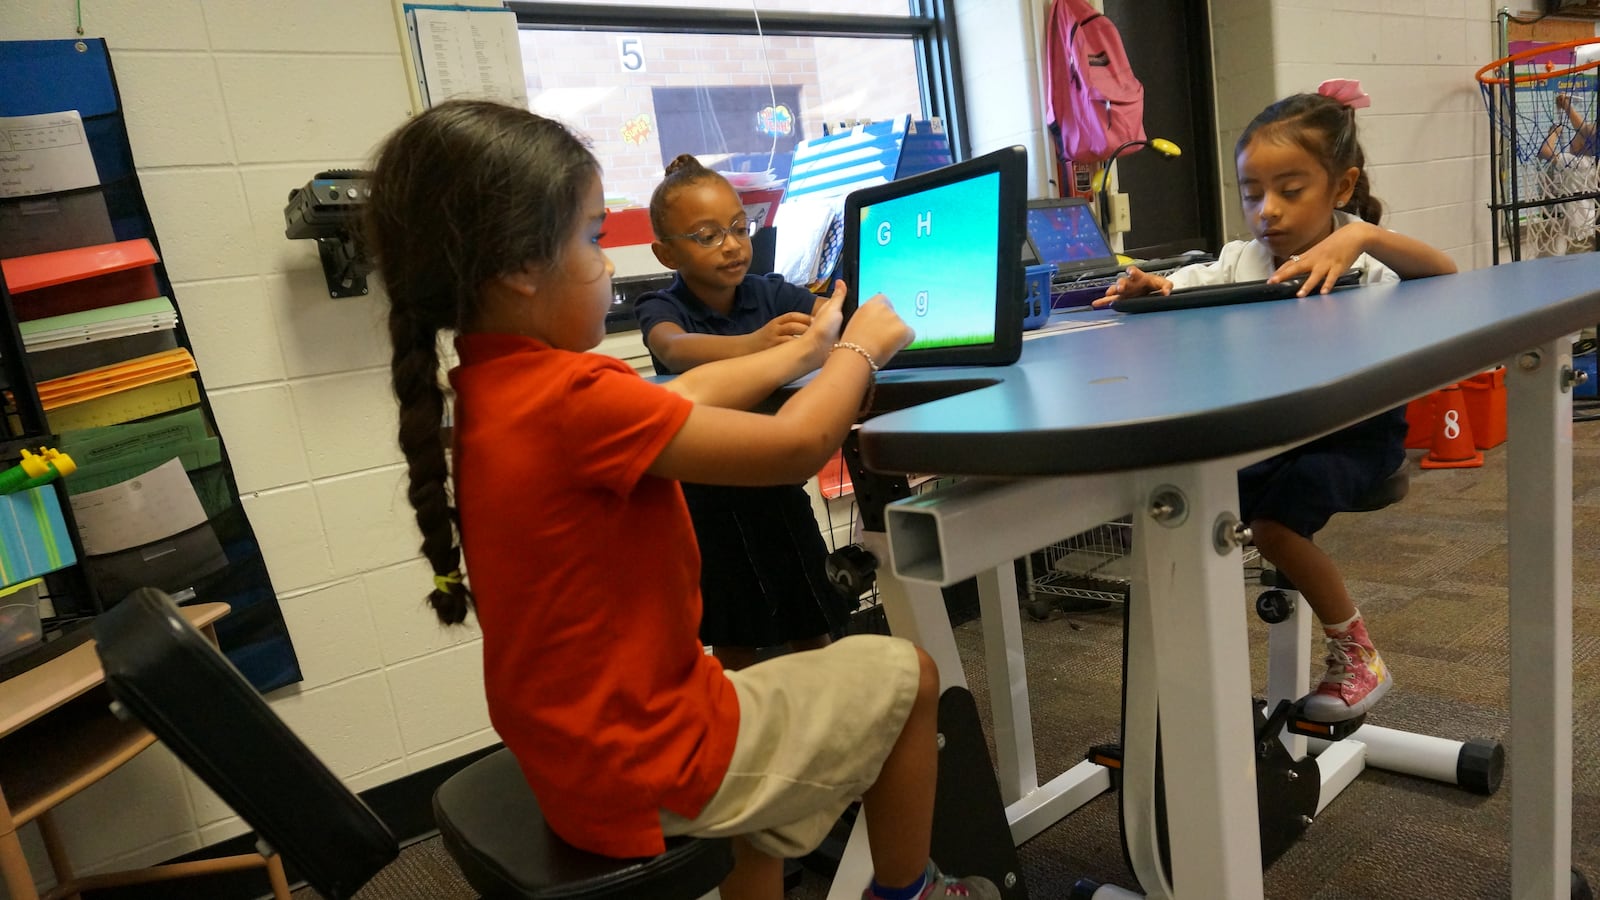 Indianapolis Public Schools School 43 hopes to add more flexible seating and technology to classrooms.